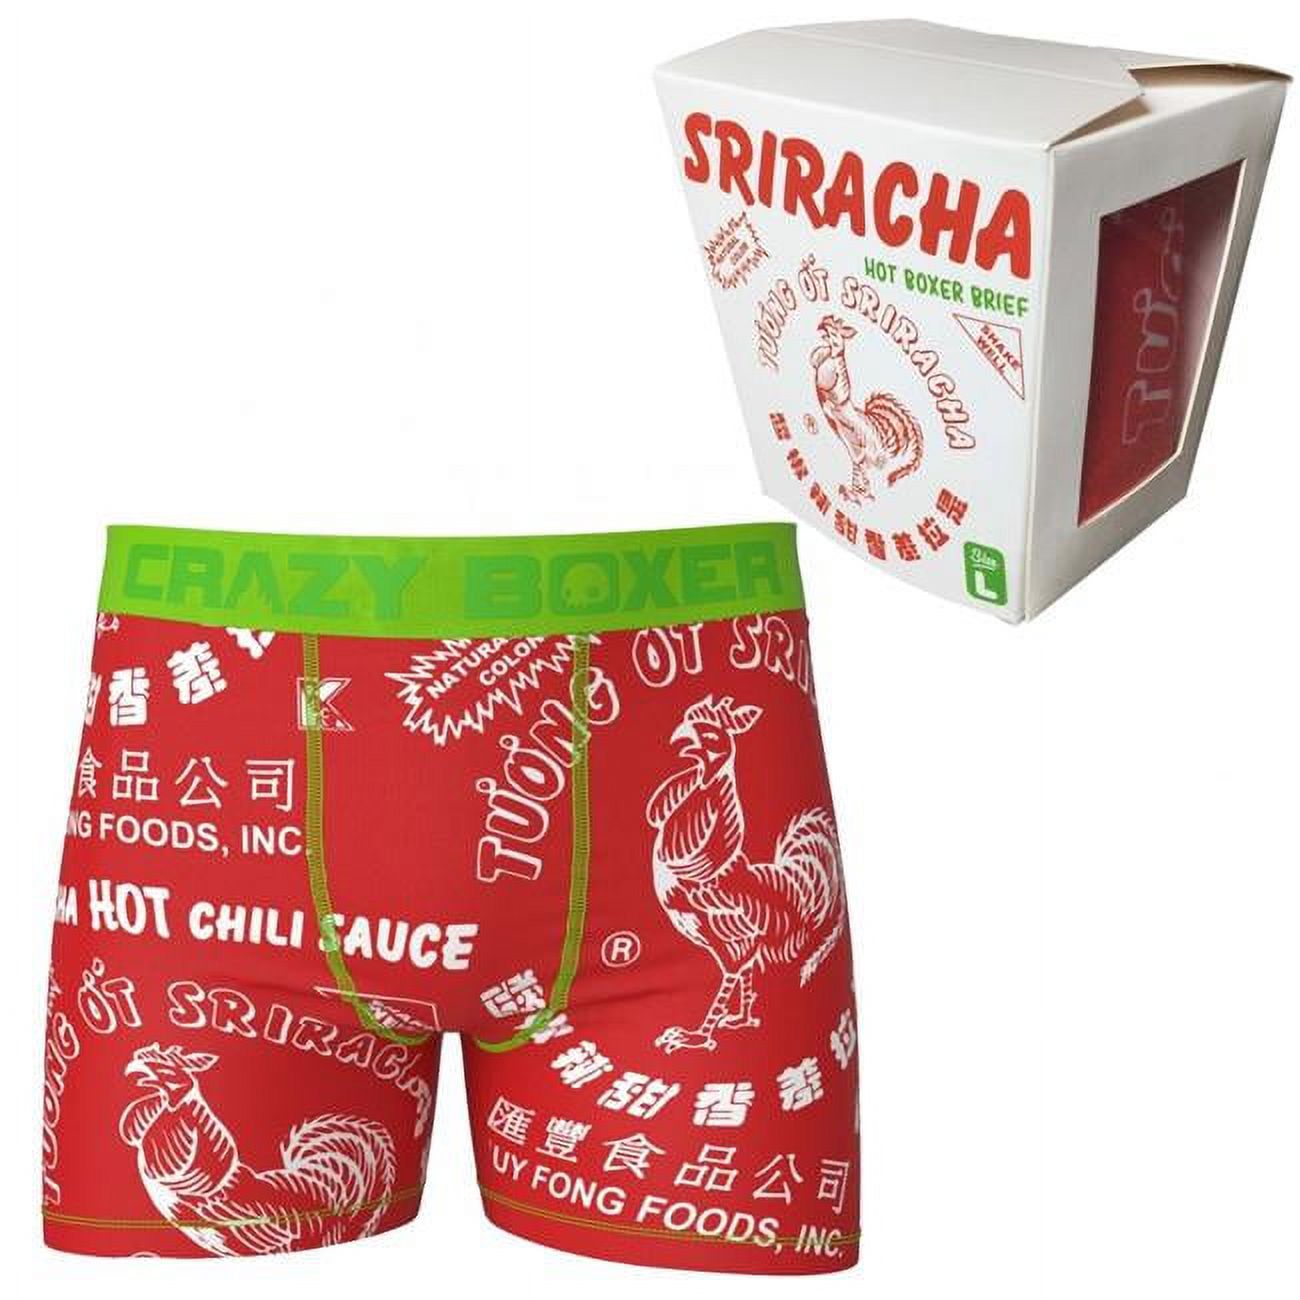 Sriracha Hot Chili Sauce Boxer Briefs in Chinese Take Out Container-XLarge - image 1 of 6